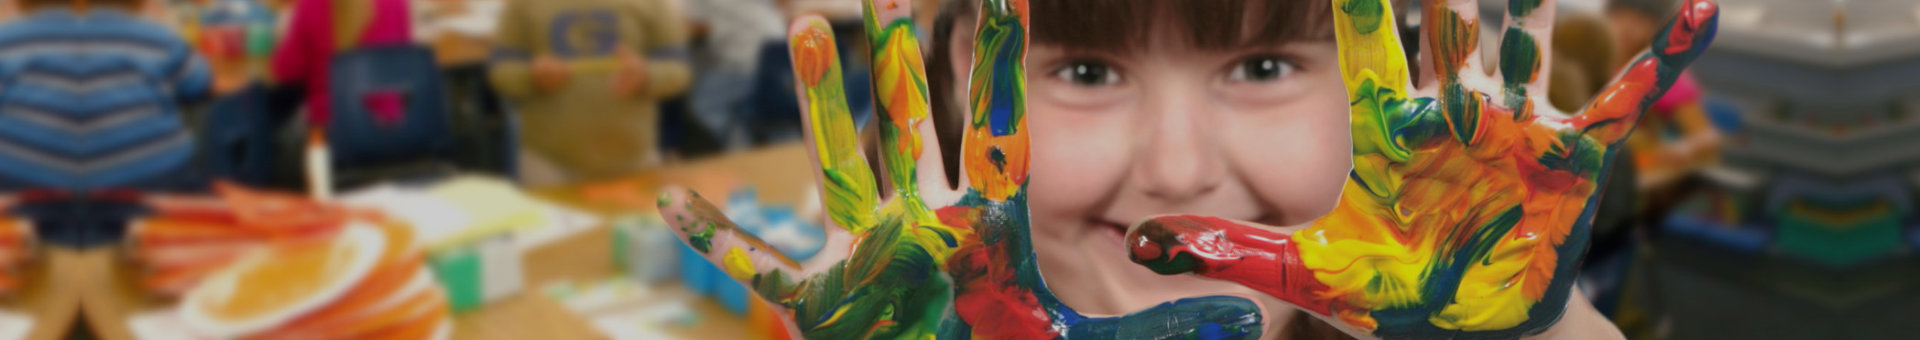 Young School Age Child Painting With Her Hands in Class